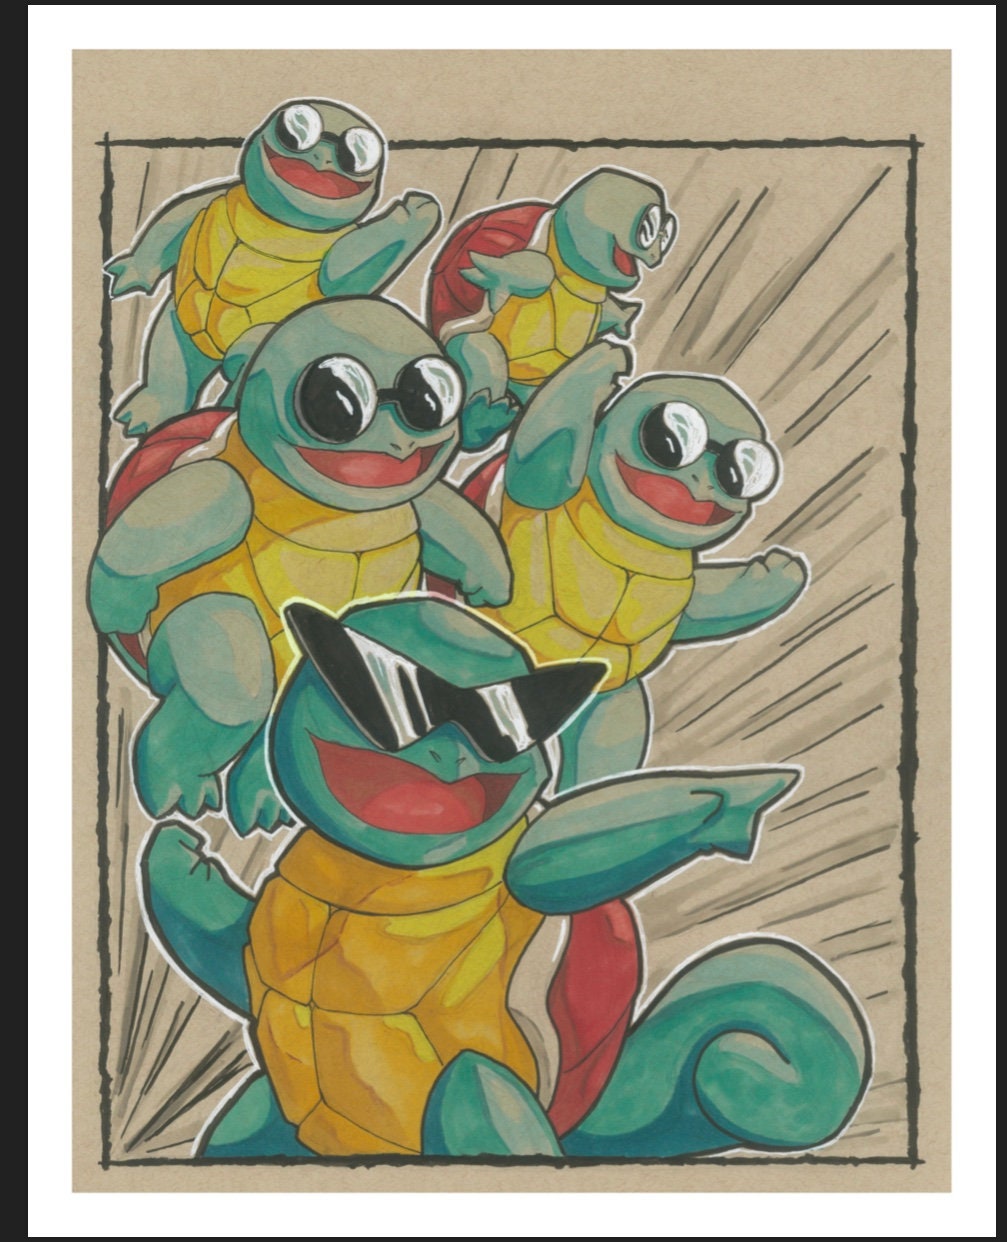 Squirtle - Wall Scroll